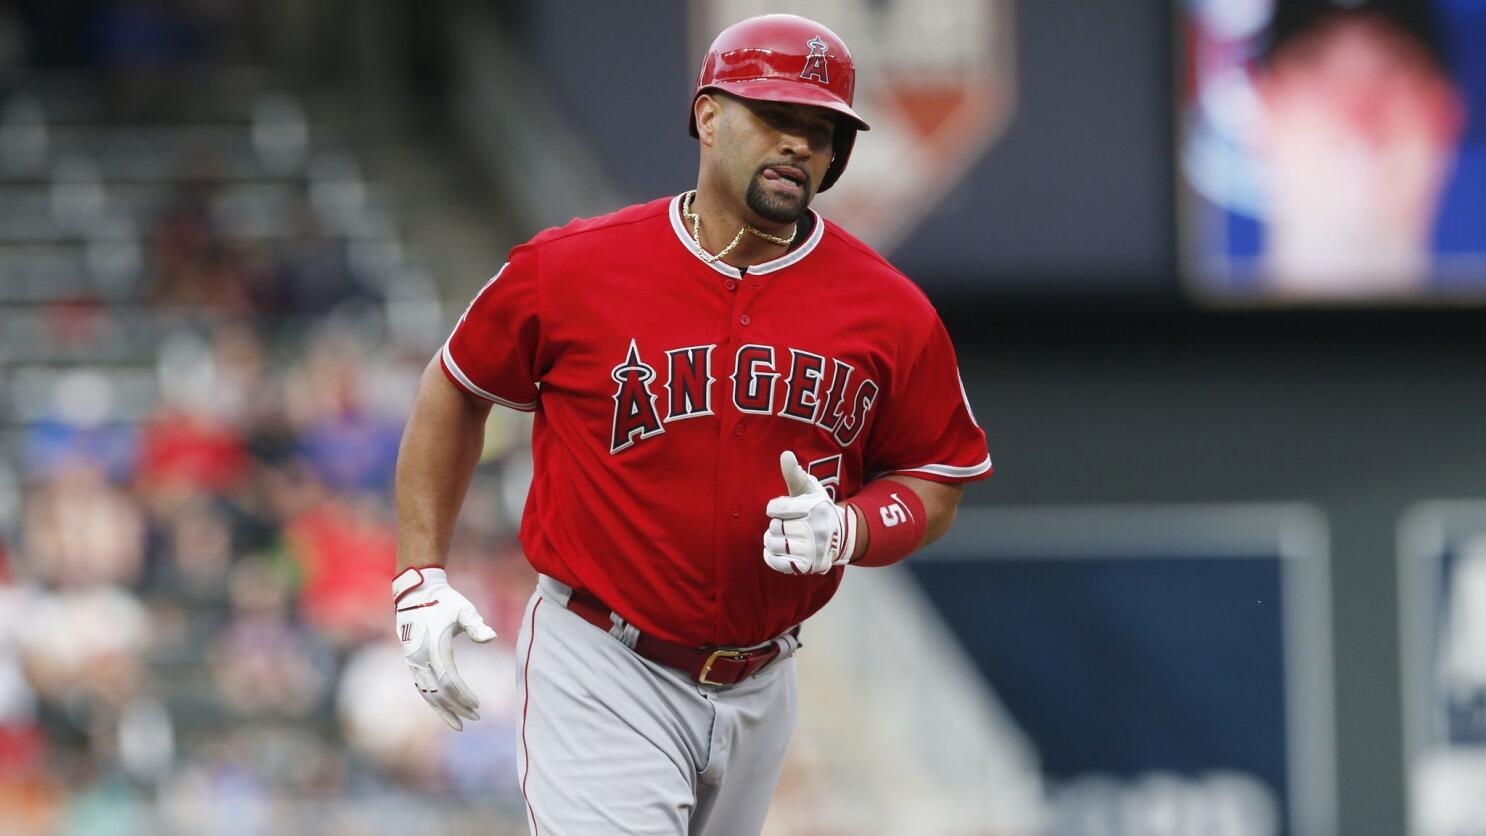 Albert Pujols likely out for season after left knee surgery